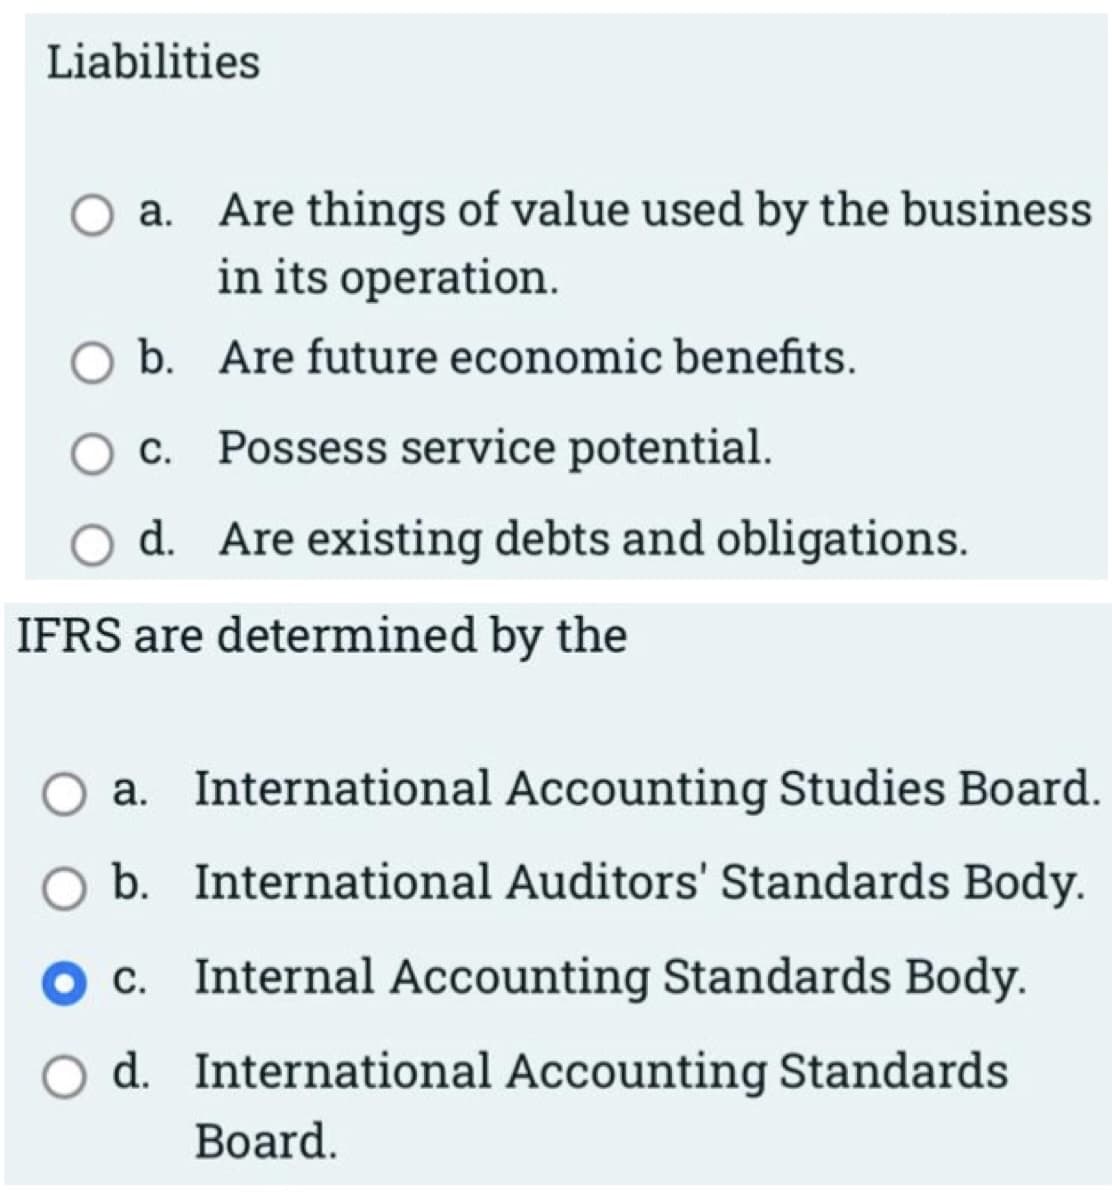 Liabilities
Are things of value used by the business
in its operation.
O a.
b. Are future economic benefits.
c. Possess service potential.
d. Are existing debts and obligations.
IFRS are determined by the
a. International Accounting Studies Board.
b. International Auditors' Standards Body.
c. Internal Accounting Standards Body.
d. International Accounting Standards
Board.
